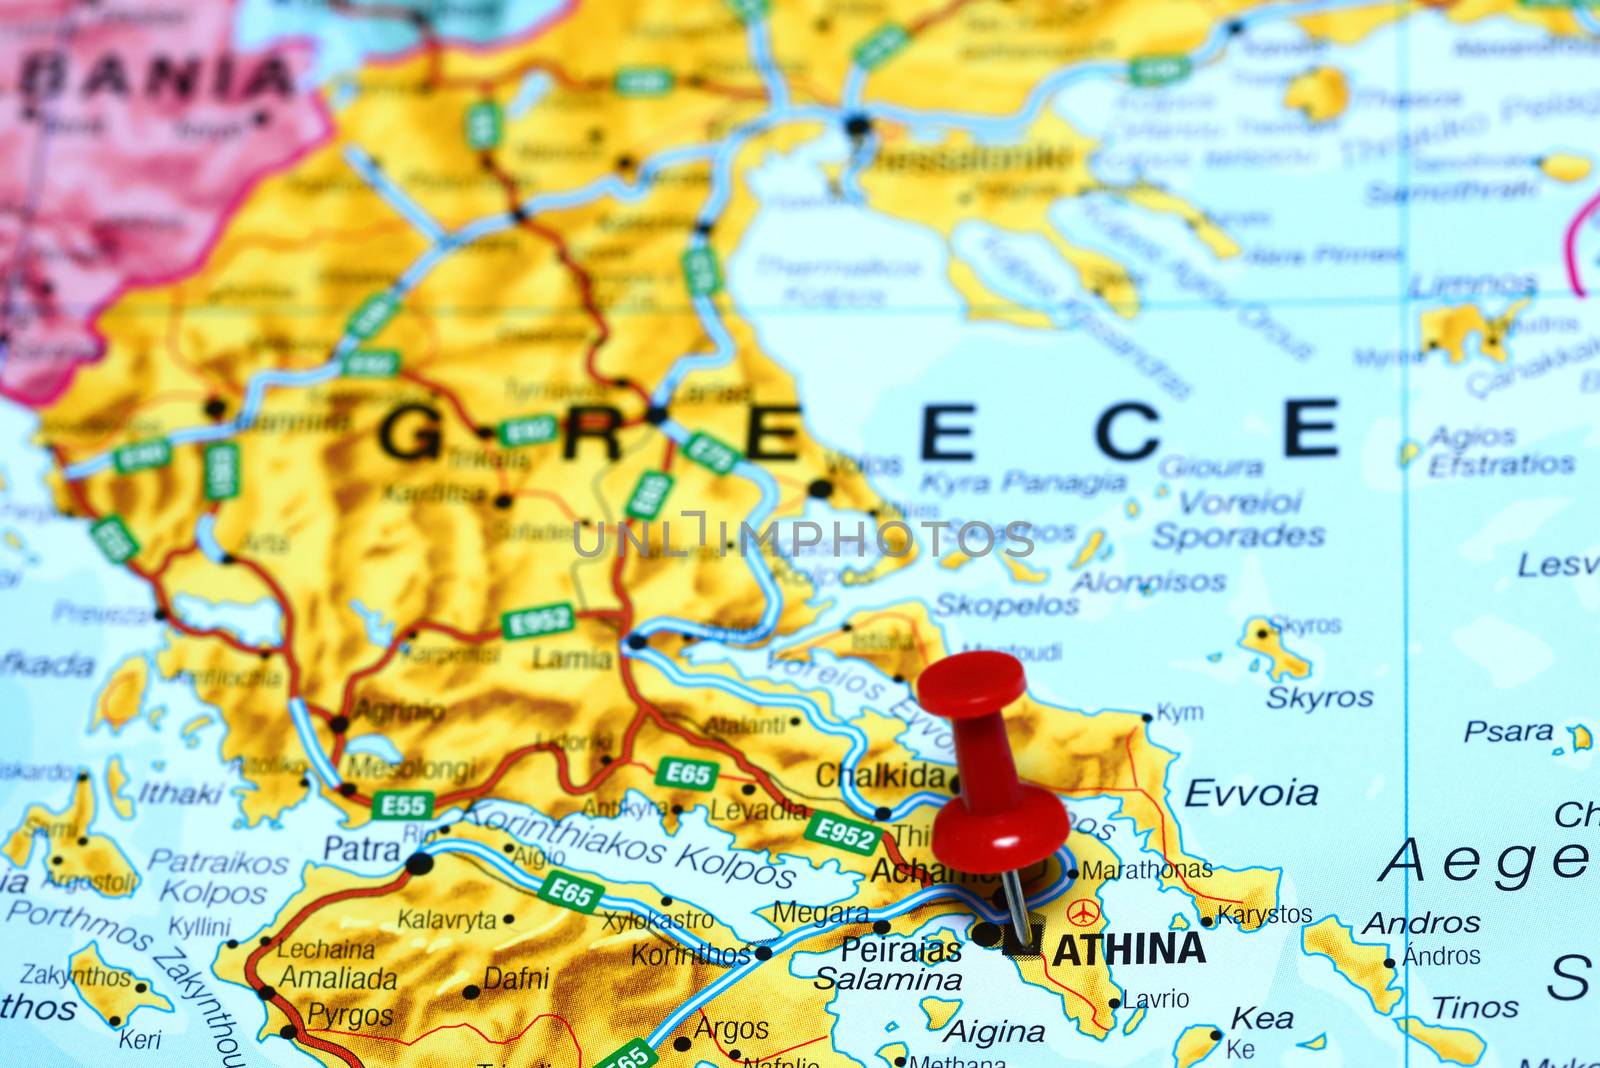 Photo of pinned Athens on a map of europe. May be used as illustration for traveling theme.